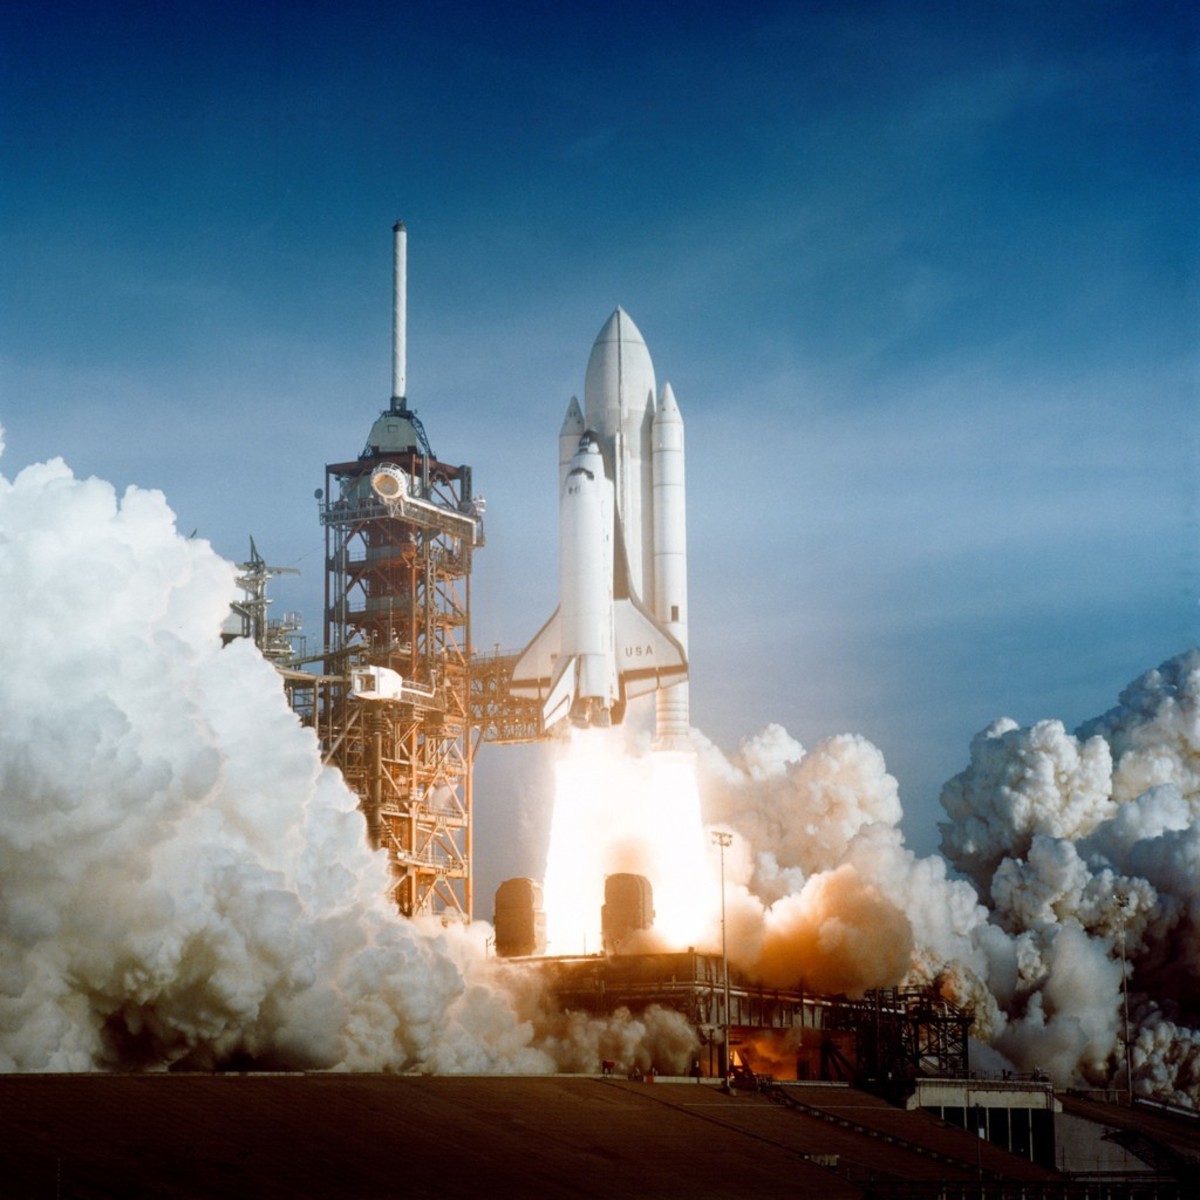 Insulating ceramic foam tiles on the underside of the space shuttle protected the space craft from the heat of reentry